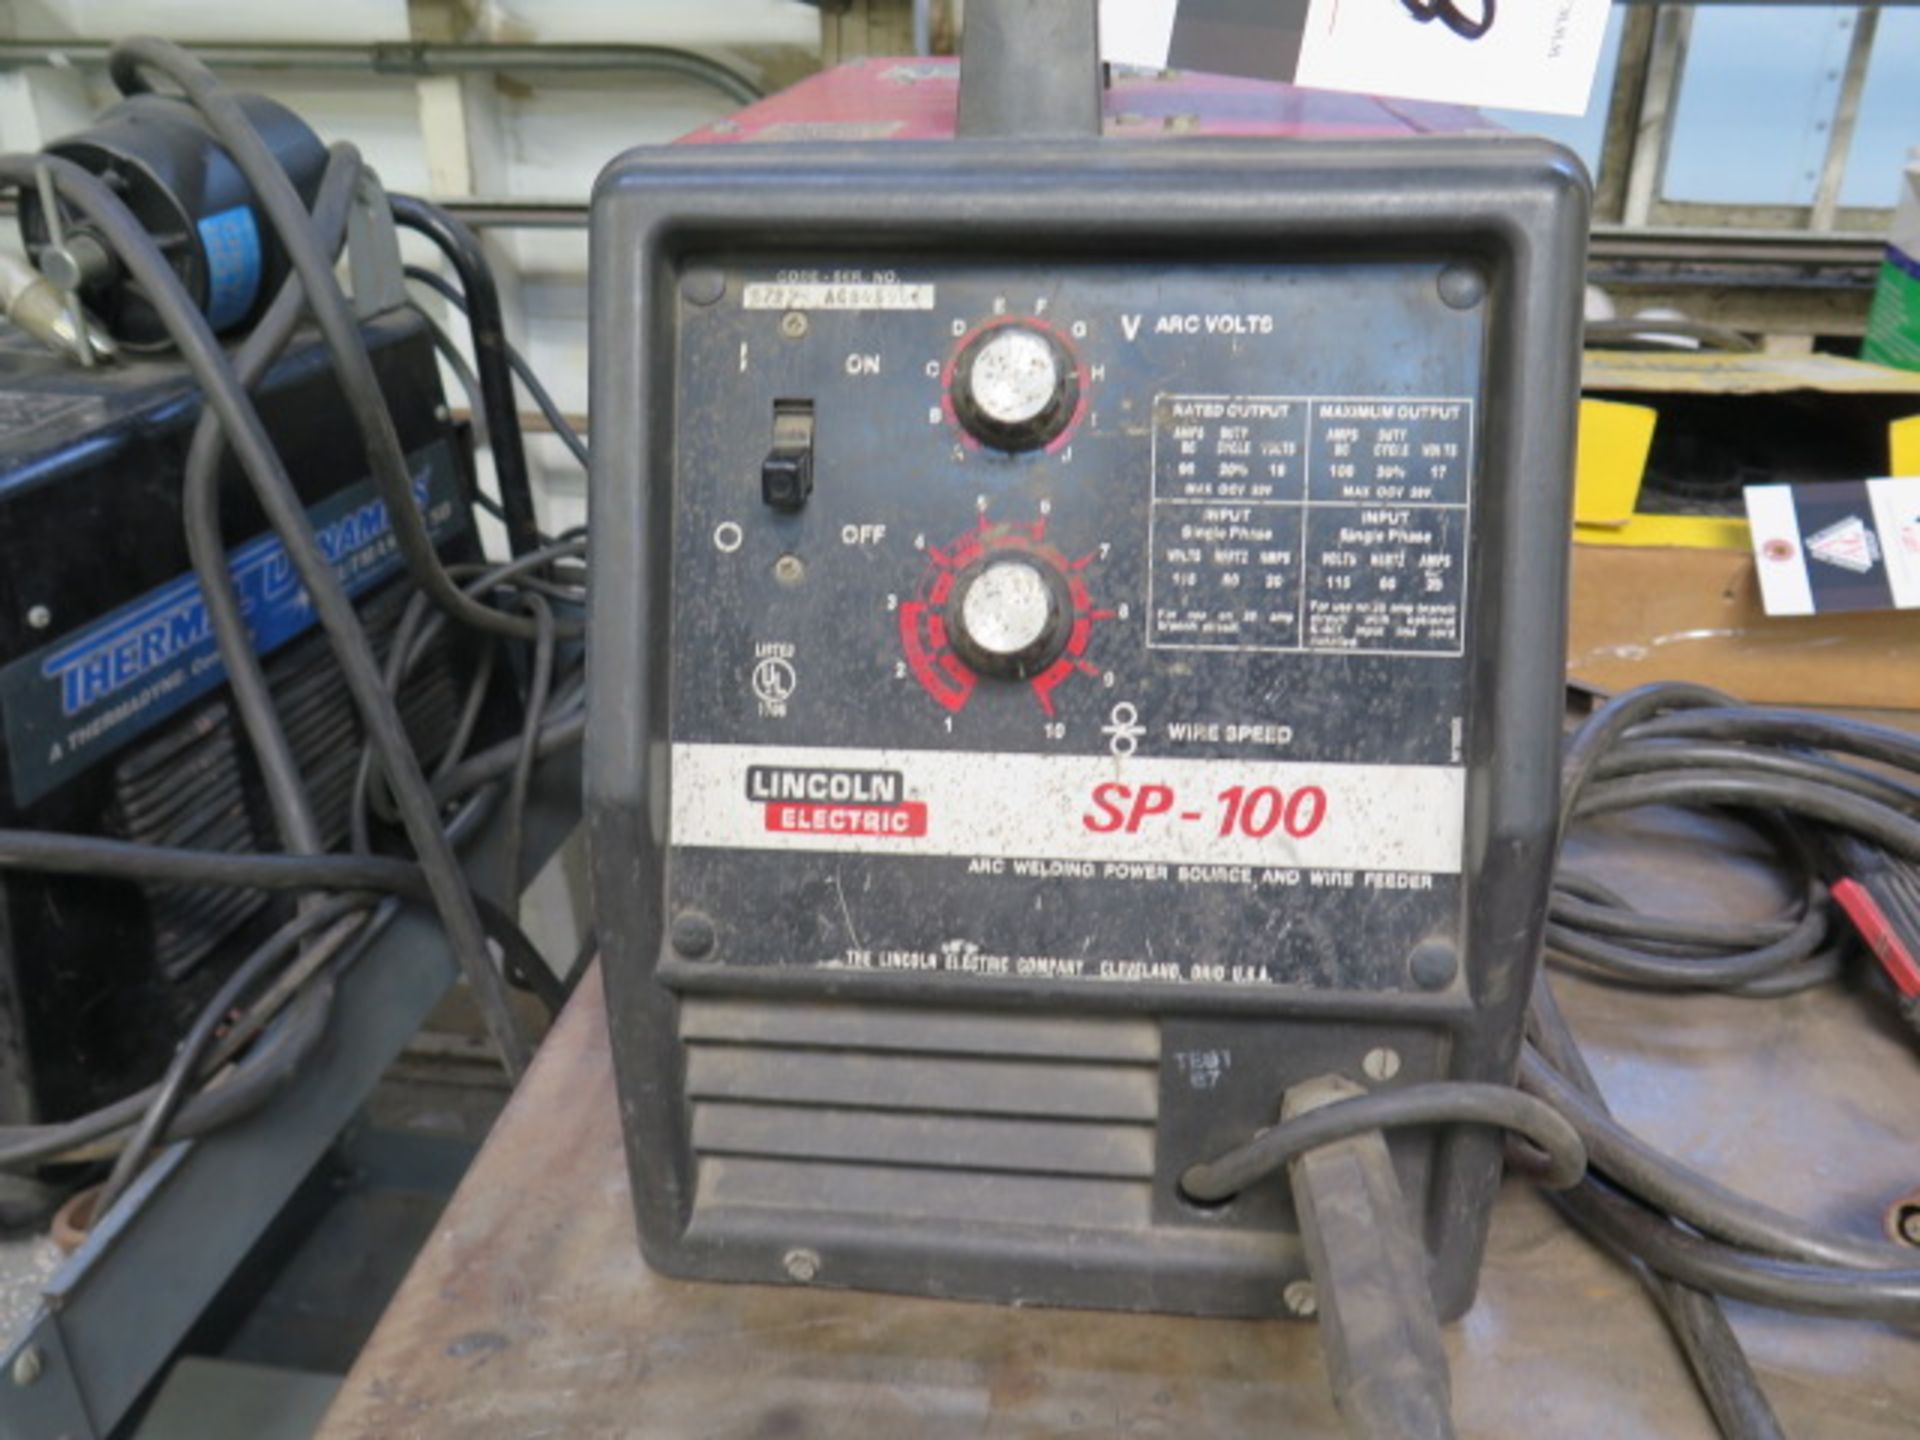 Lincoln SP-100 110 Volt Arc Welding Power Source and Wire Feeder (SOLD AS-IS - NO WARRANTY) - Image 3 of 6